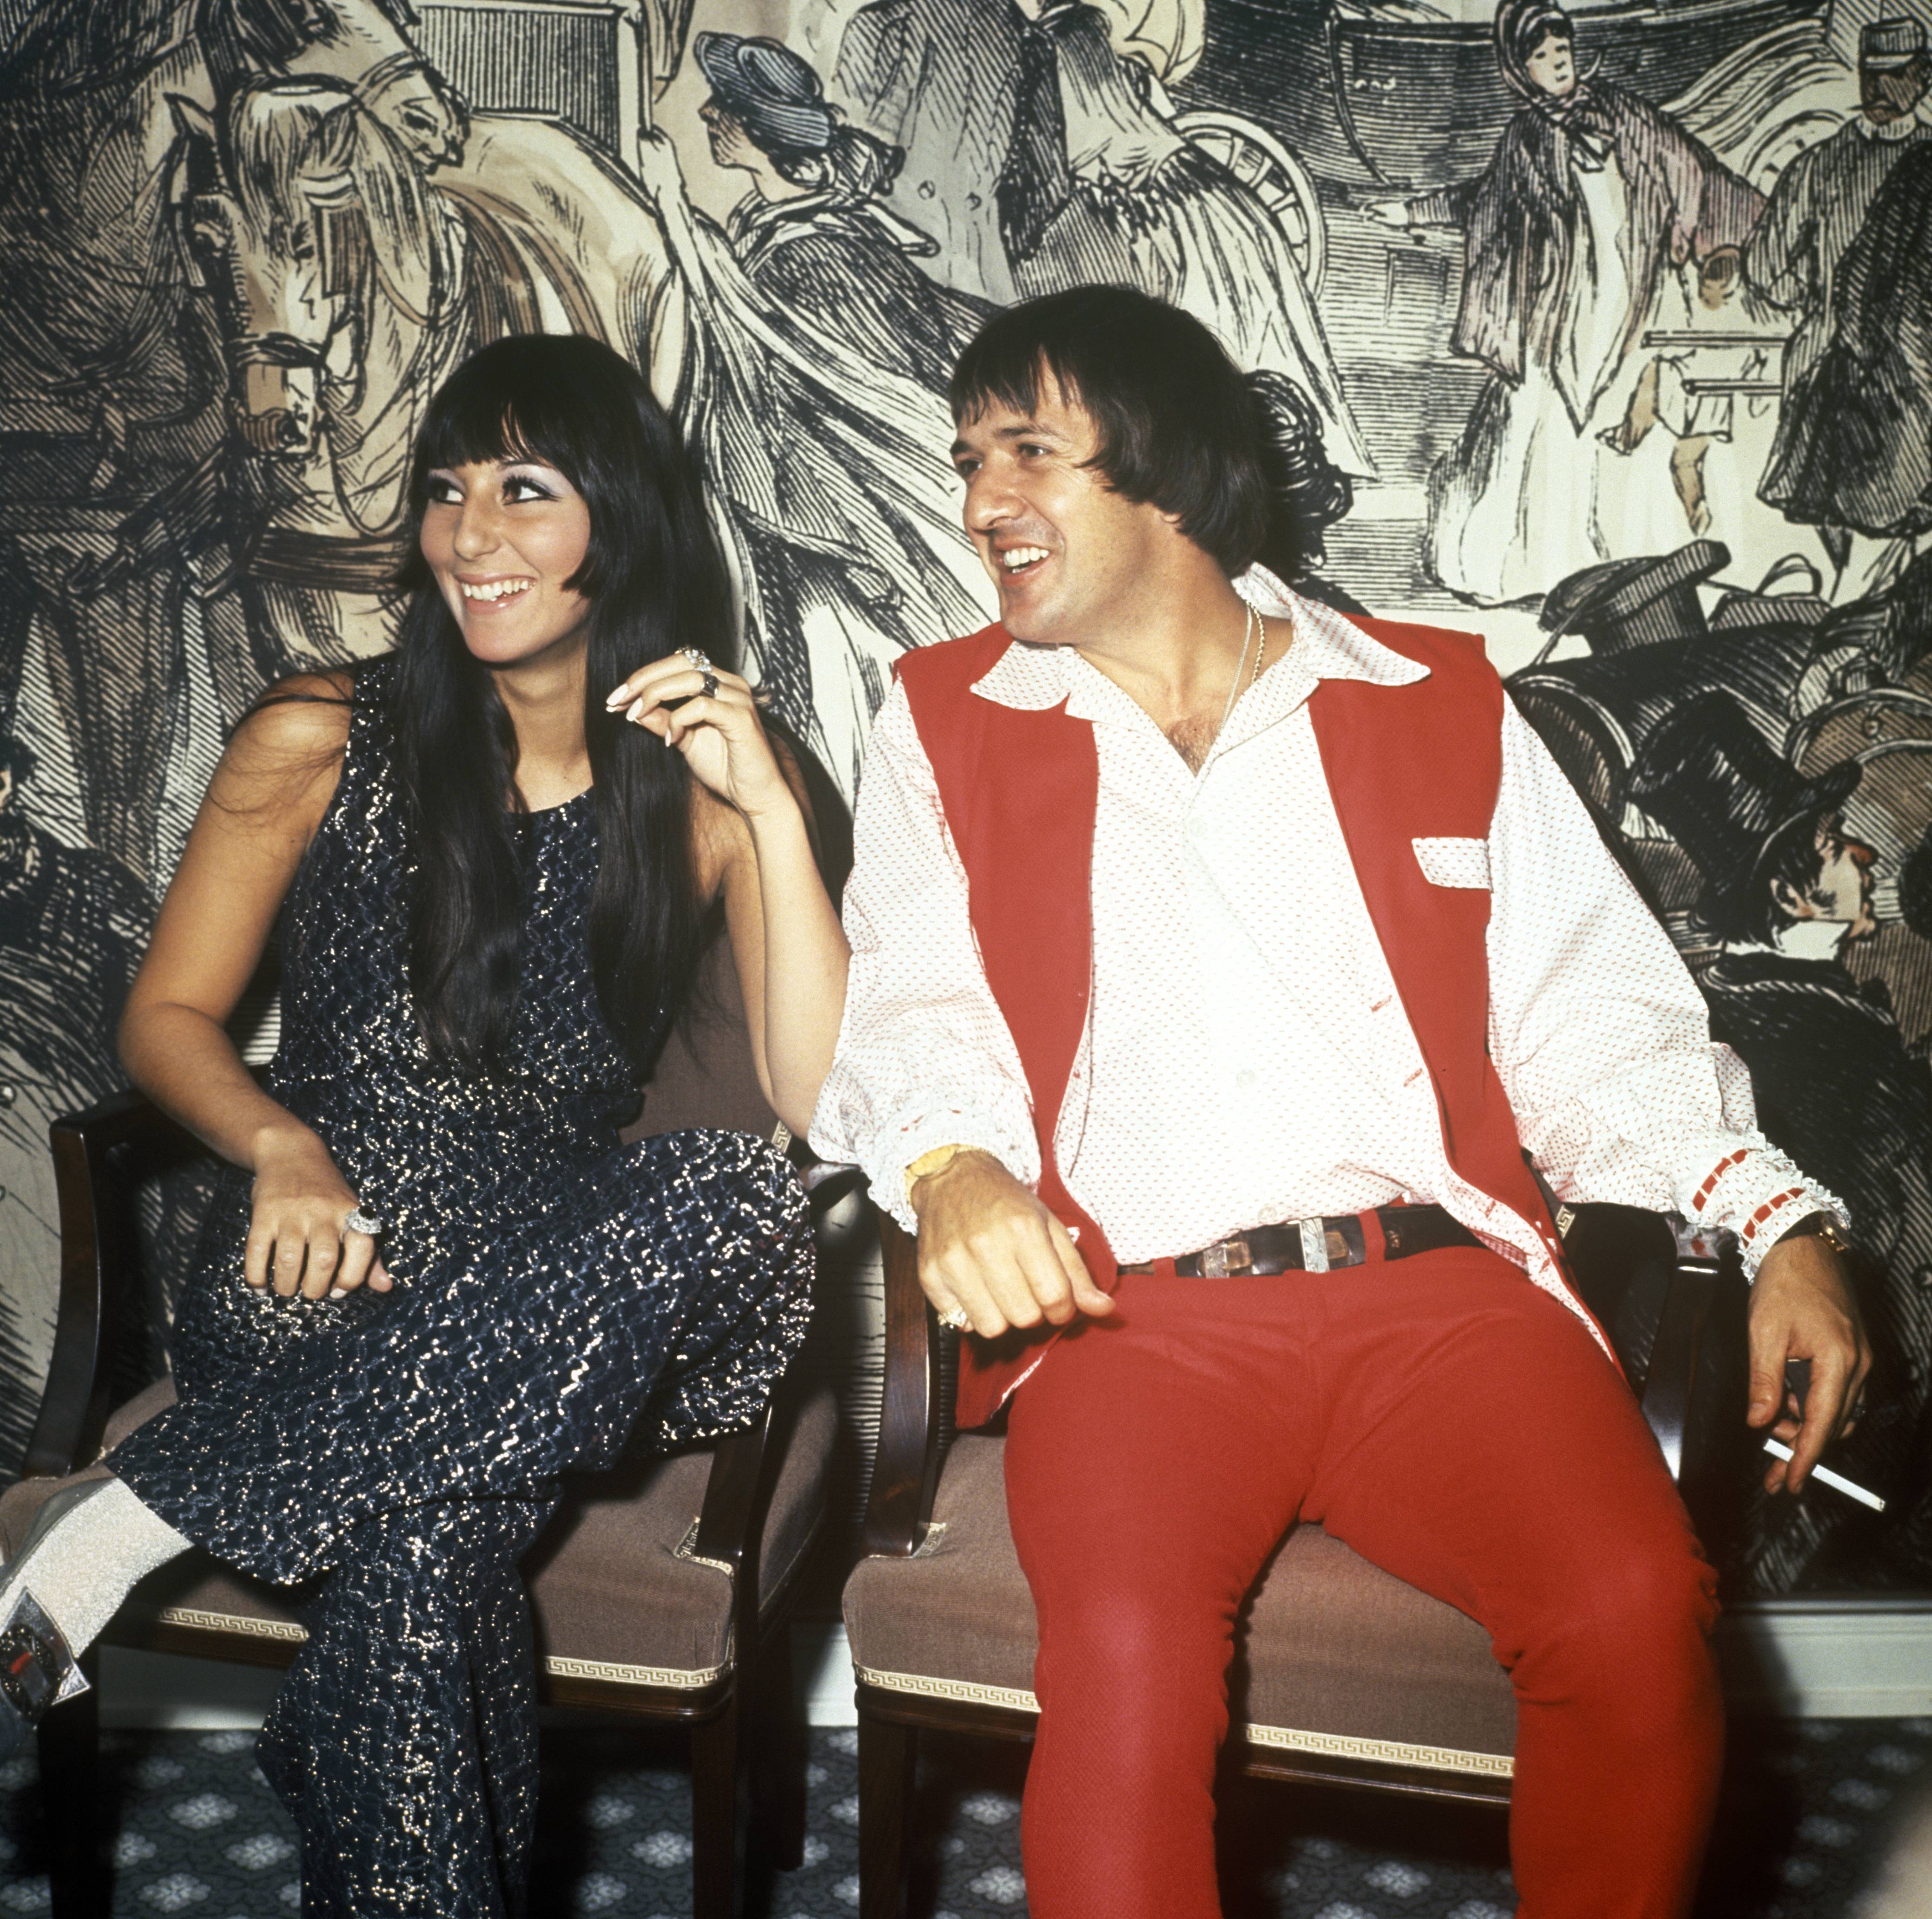 Cher wears a sparkling black dress and Sonny Bono wears a white shirt and red vest and pants.